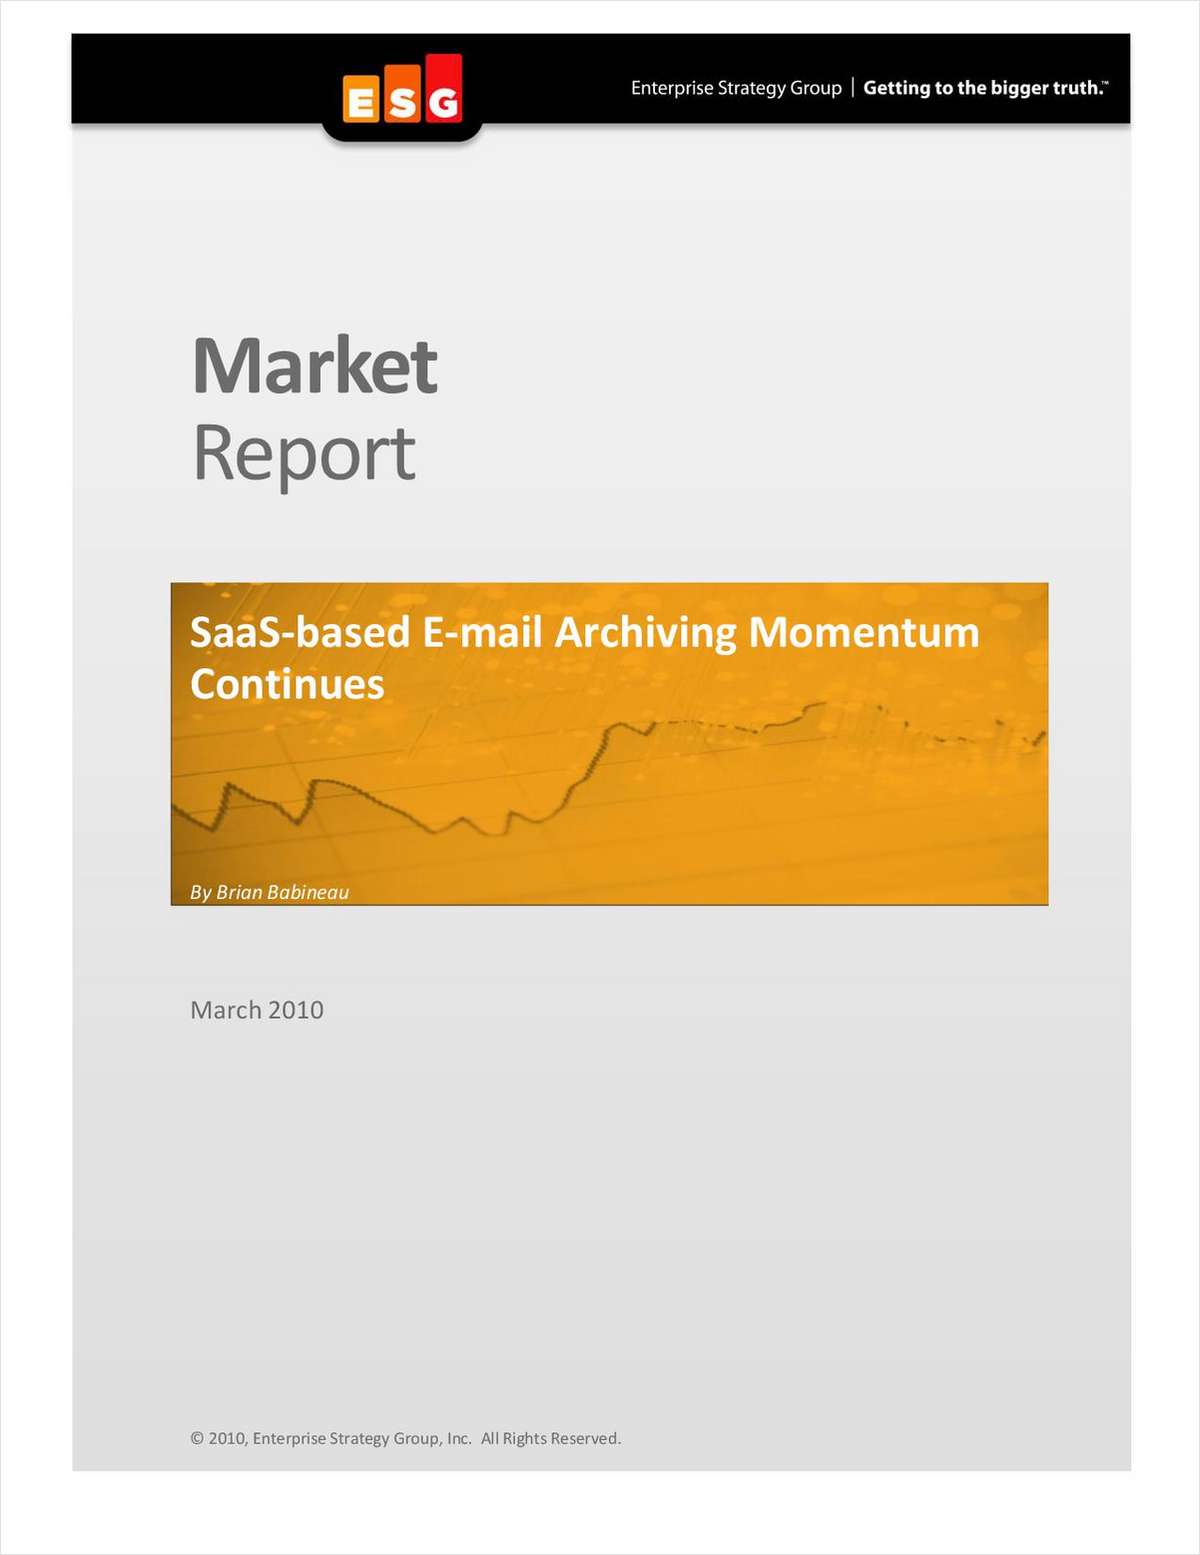 Enterprise Strategy Group Report on SaaS Archiving